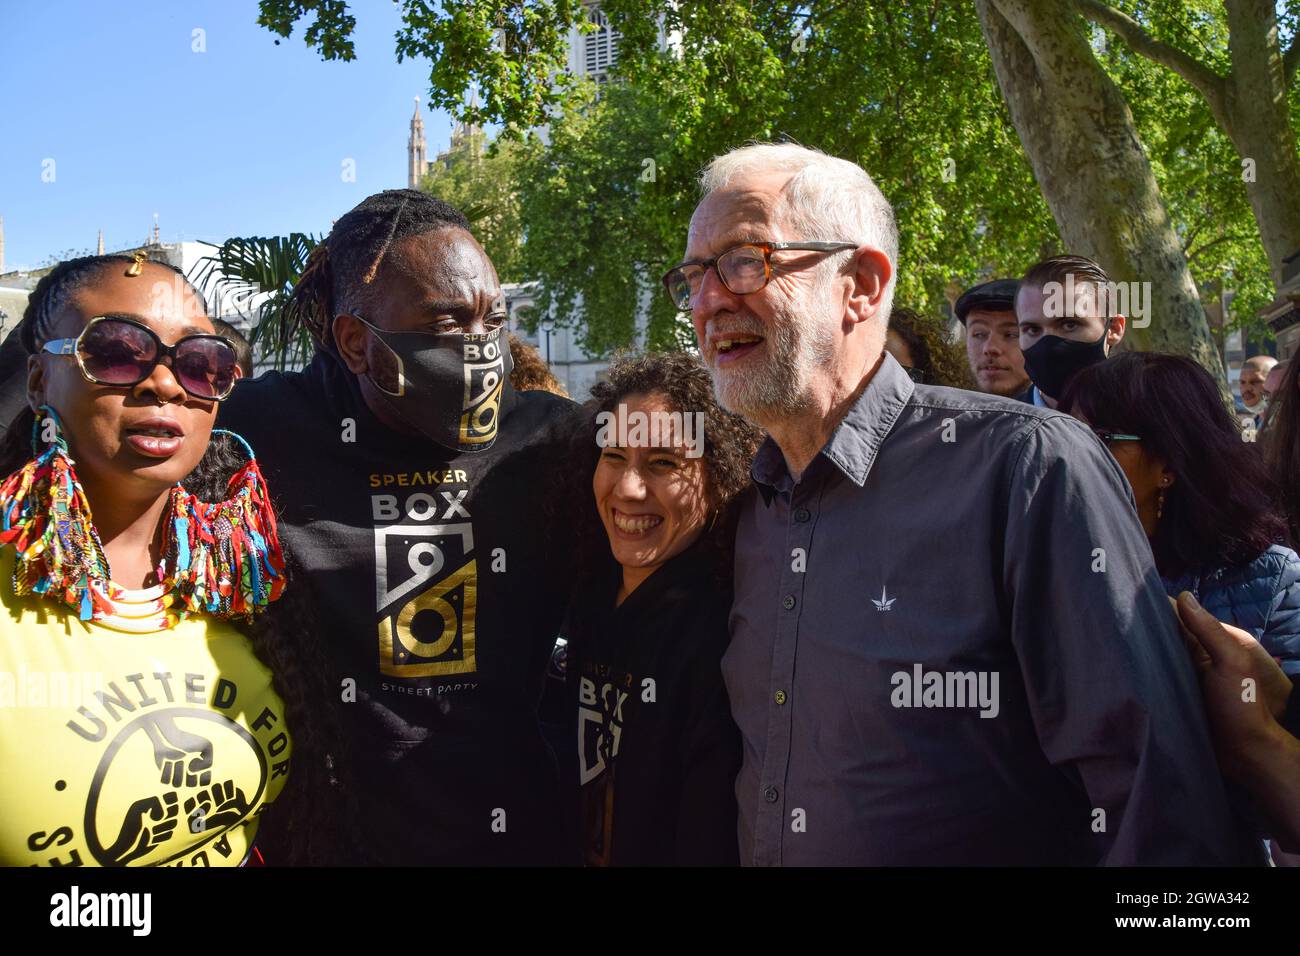 London, United Kingdom. 29th May 2021. Jeremy Corbyn at the Kill The Bill protest in Parliament Square. Crowds marched through Central London in protest of the Police, Crime, Sentencing and Courts Bill. Stock Photo